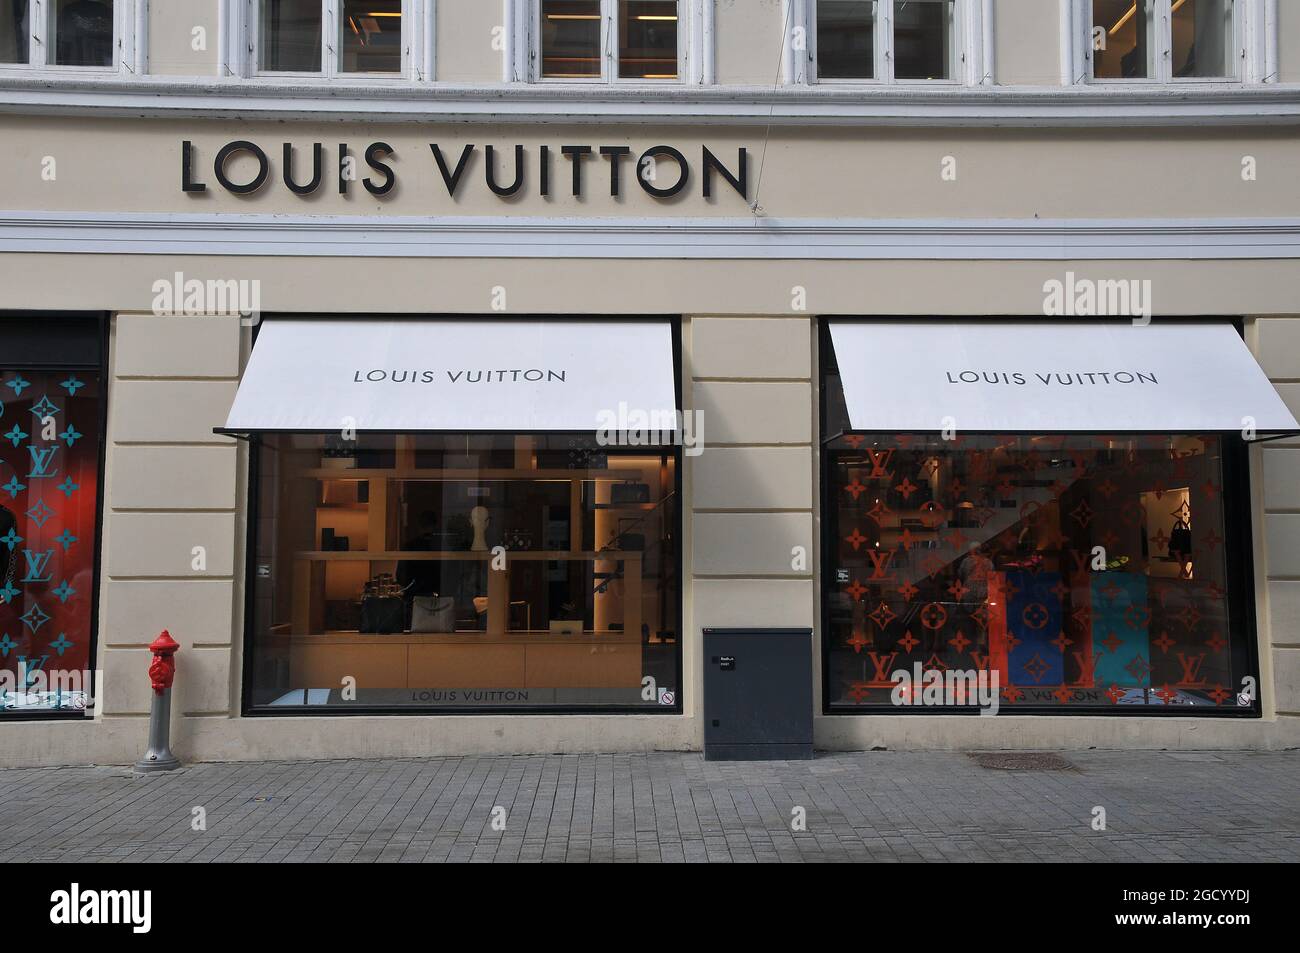 Copenhagen, Denmark. 10 August 2021, Shoppers waiting at Louis Vuitton store dueto social distancing in store due to covid-19 health issue. (Photo Photo - Alamy